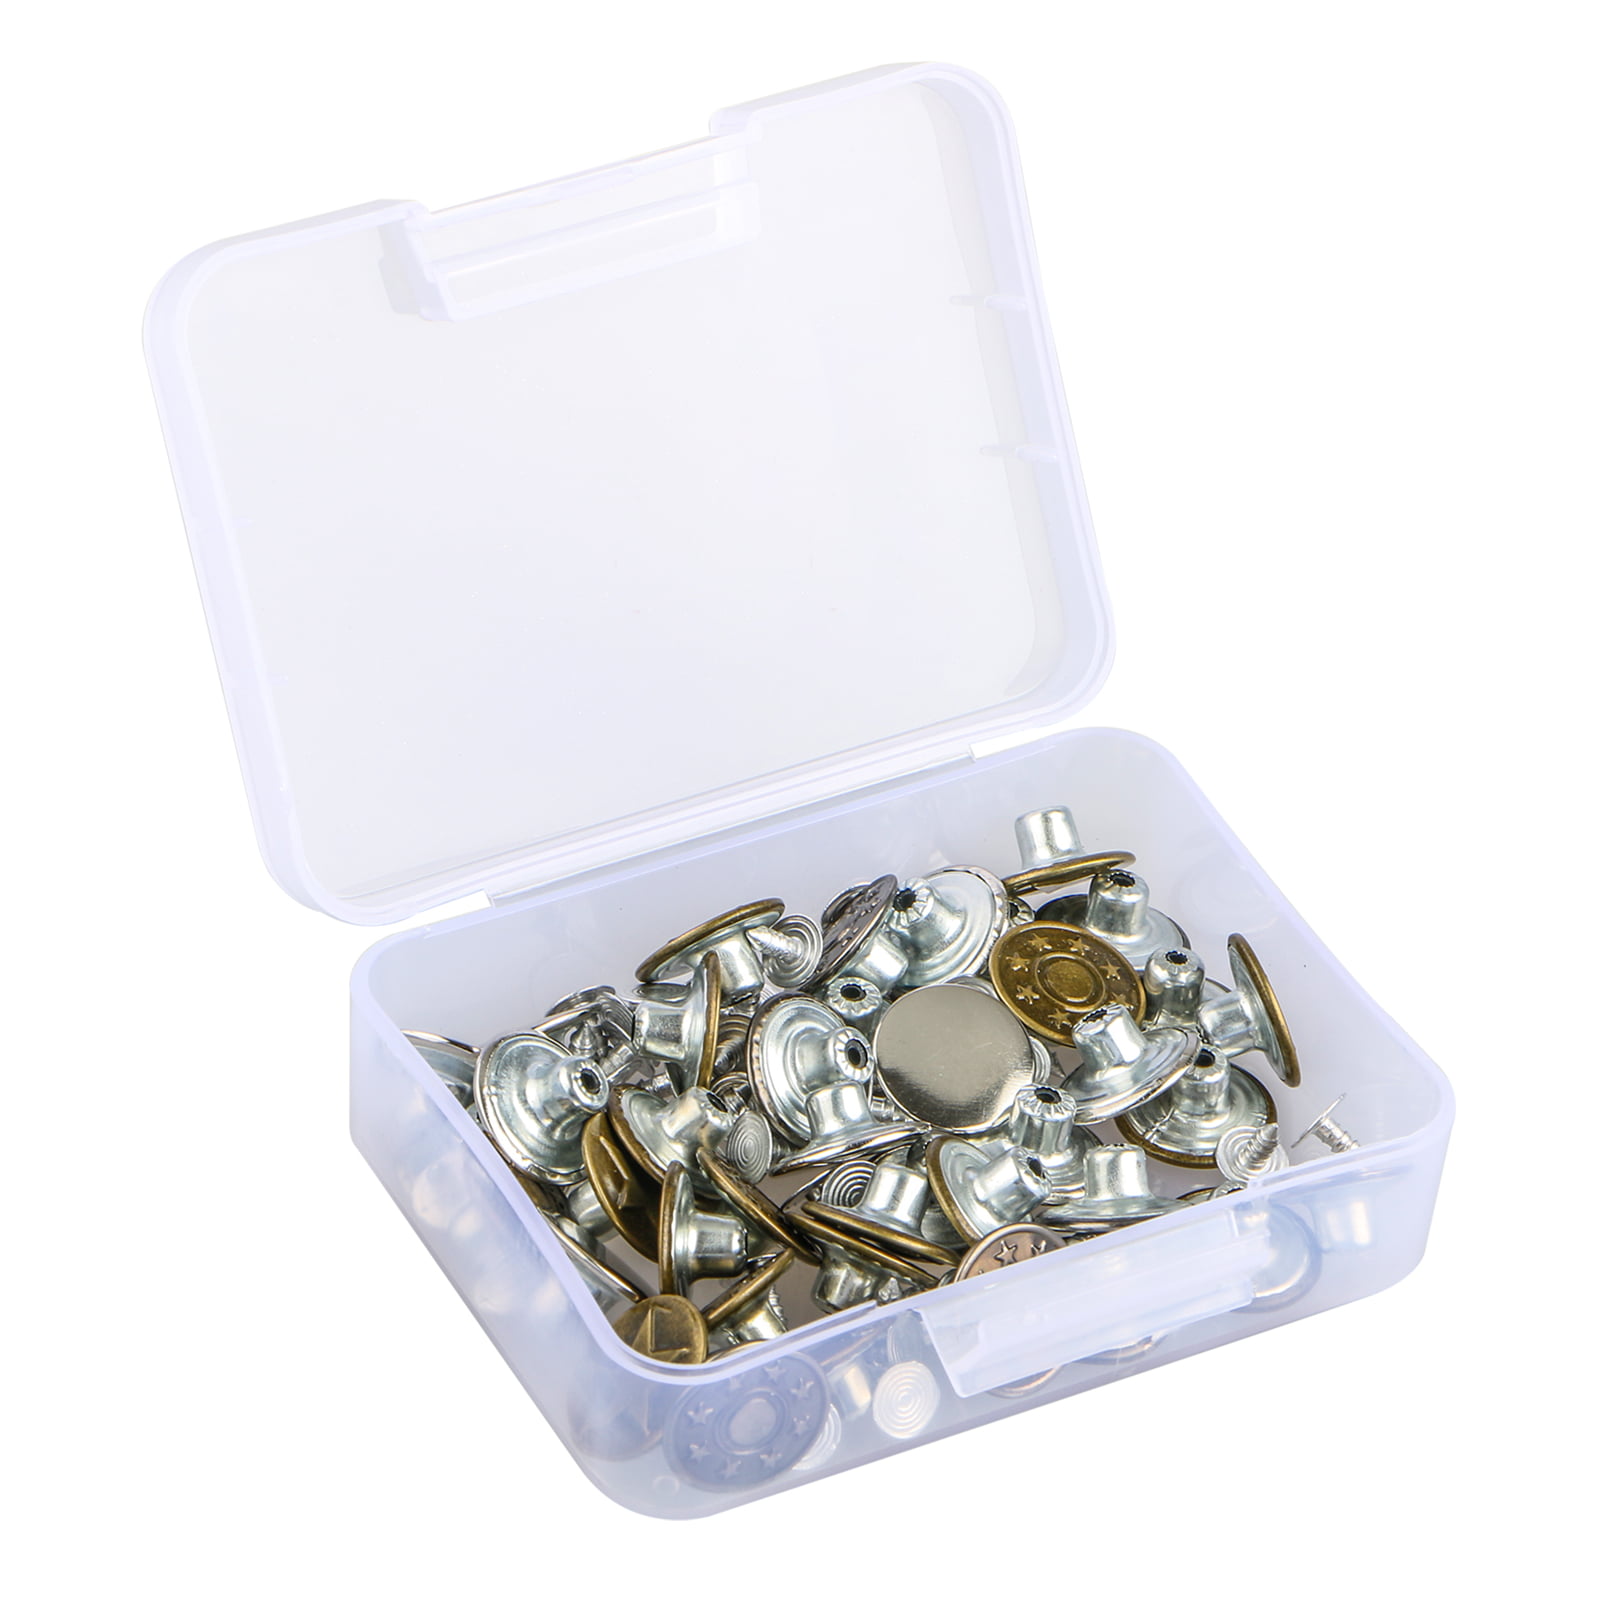 40 Sets Jeans Metal Tack Buttons Replacement Kit Repair Sewing Pants Clothes+Box 